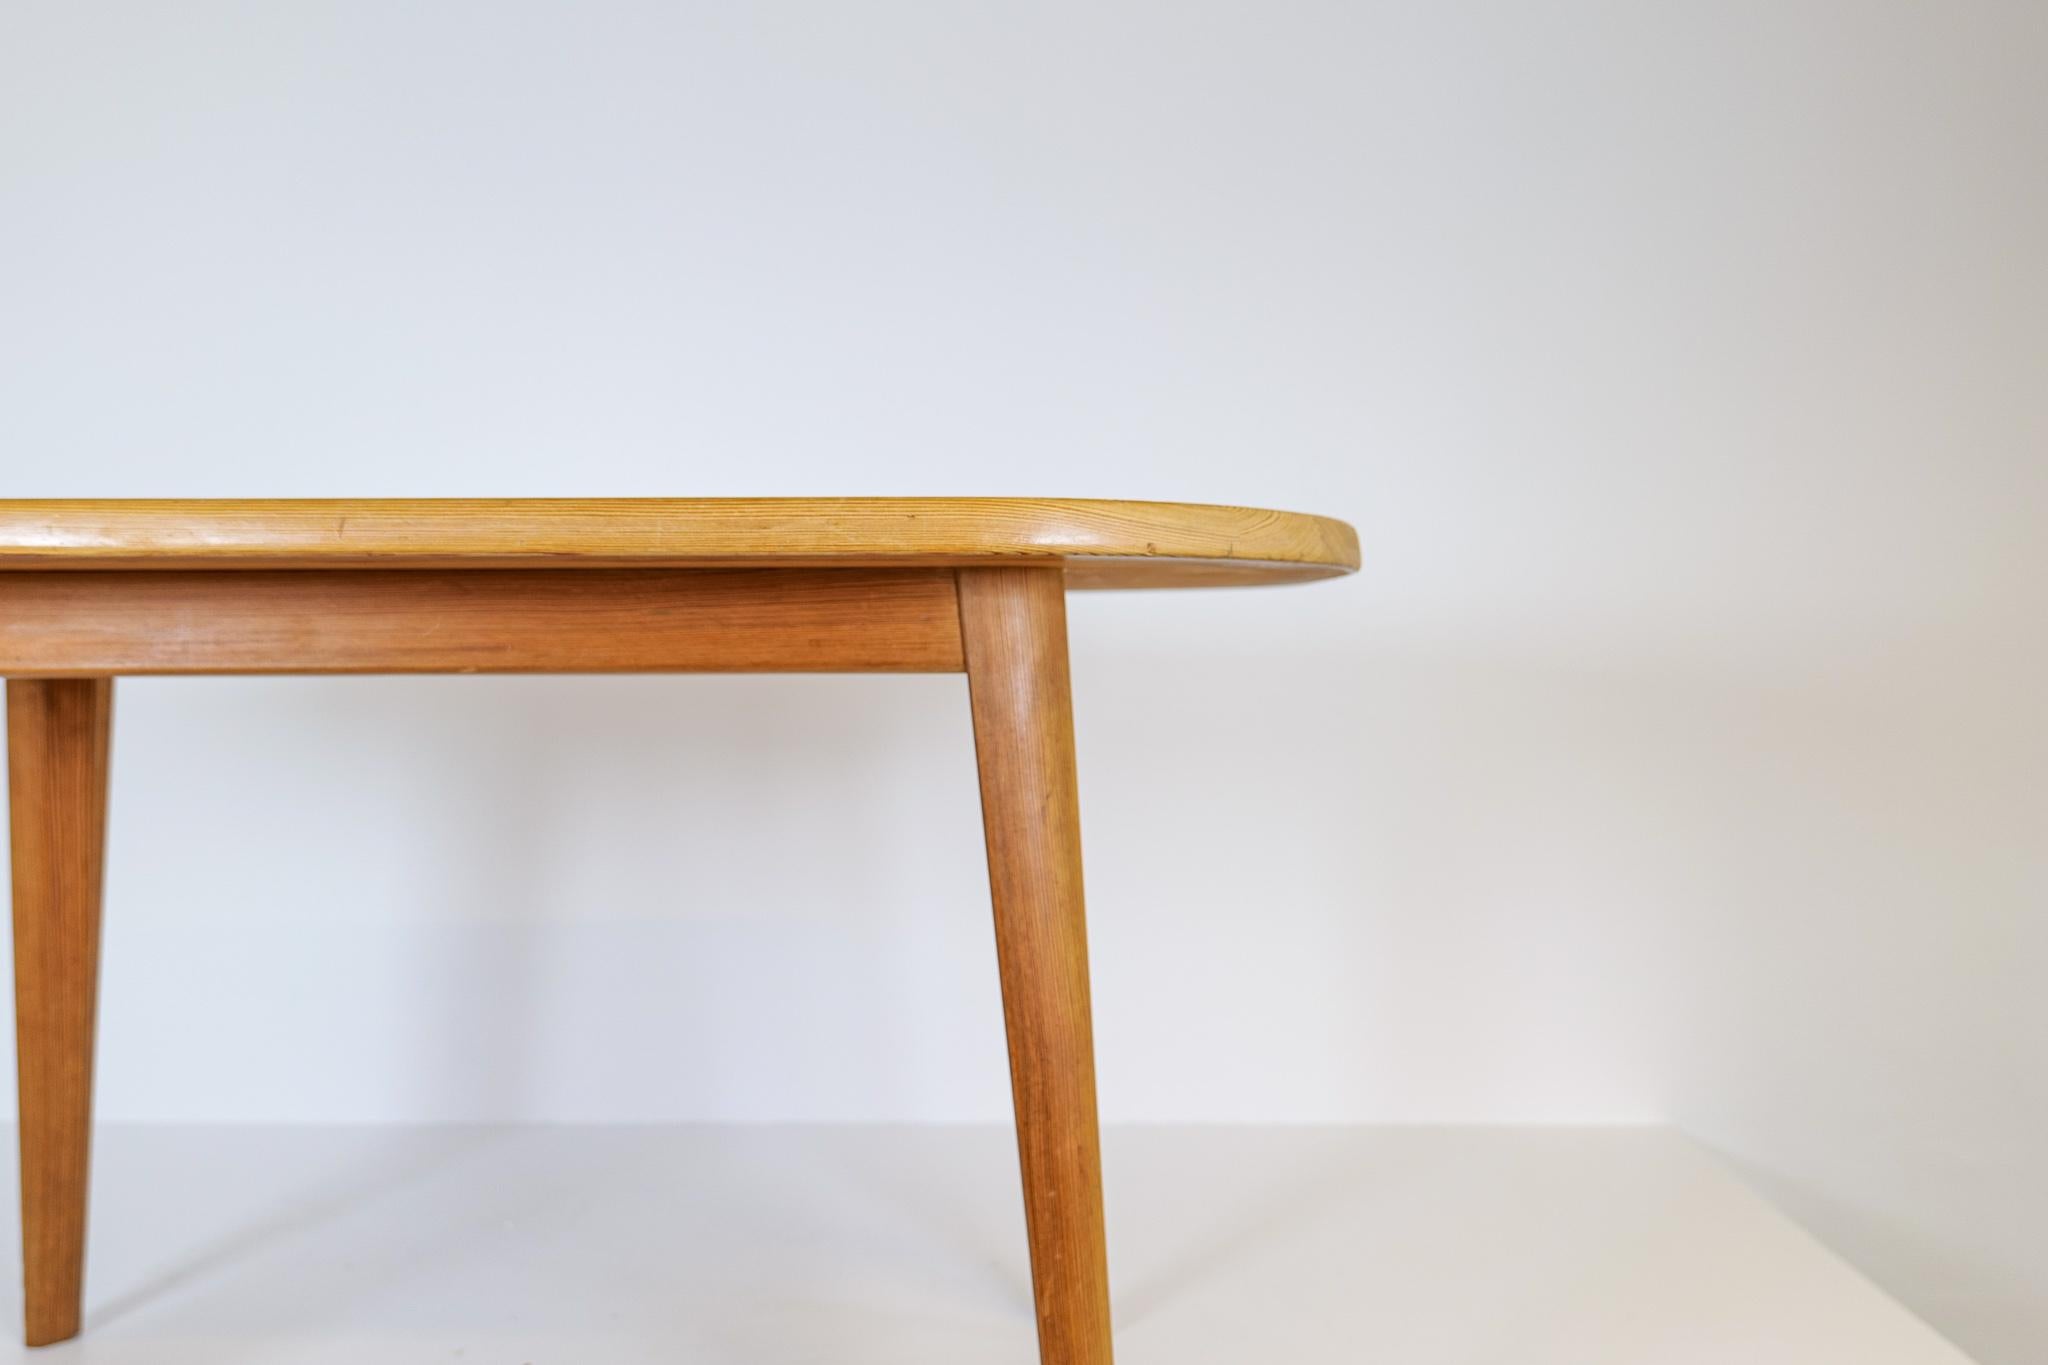 Midcentury Pine Coffee Table by Carl Malmsten, Sweden, 1940s For Sale 2